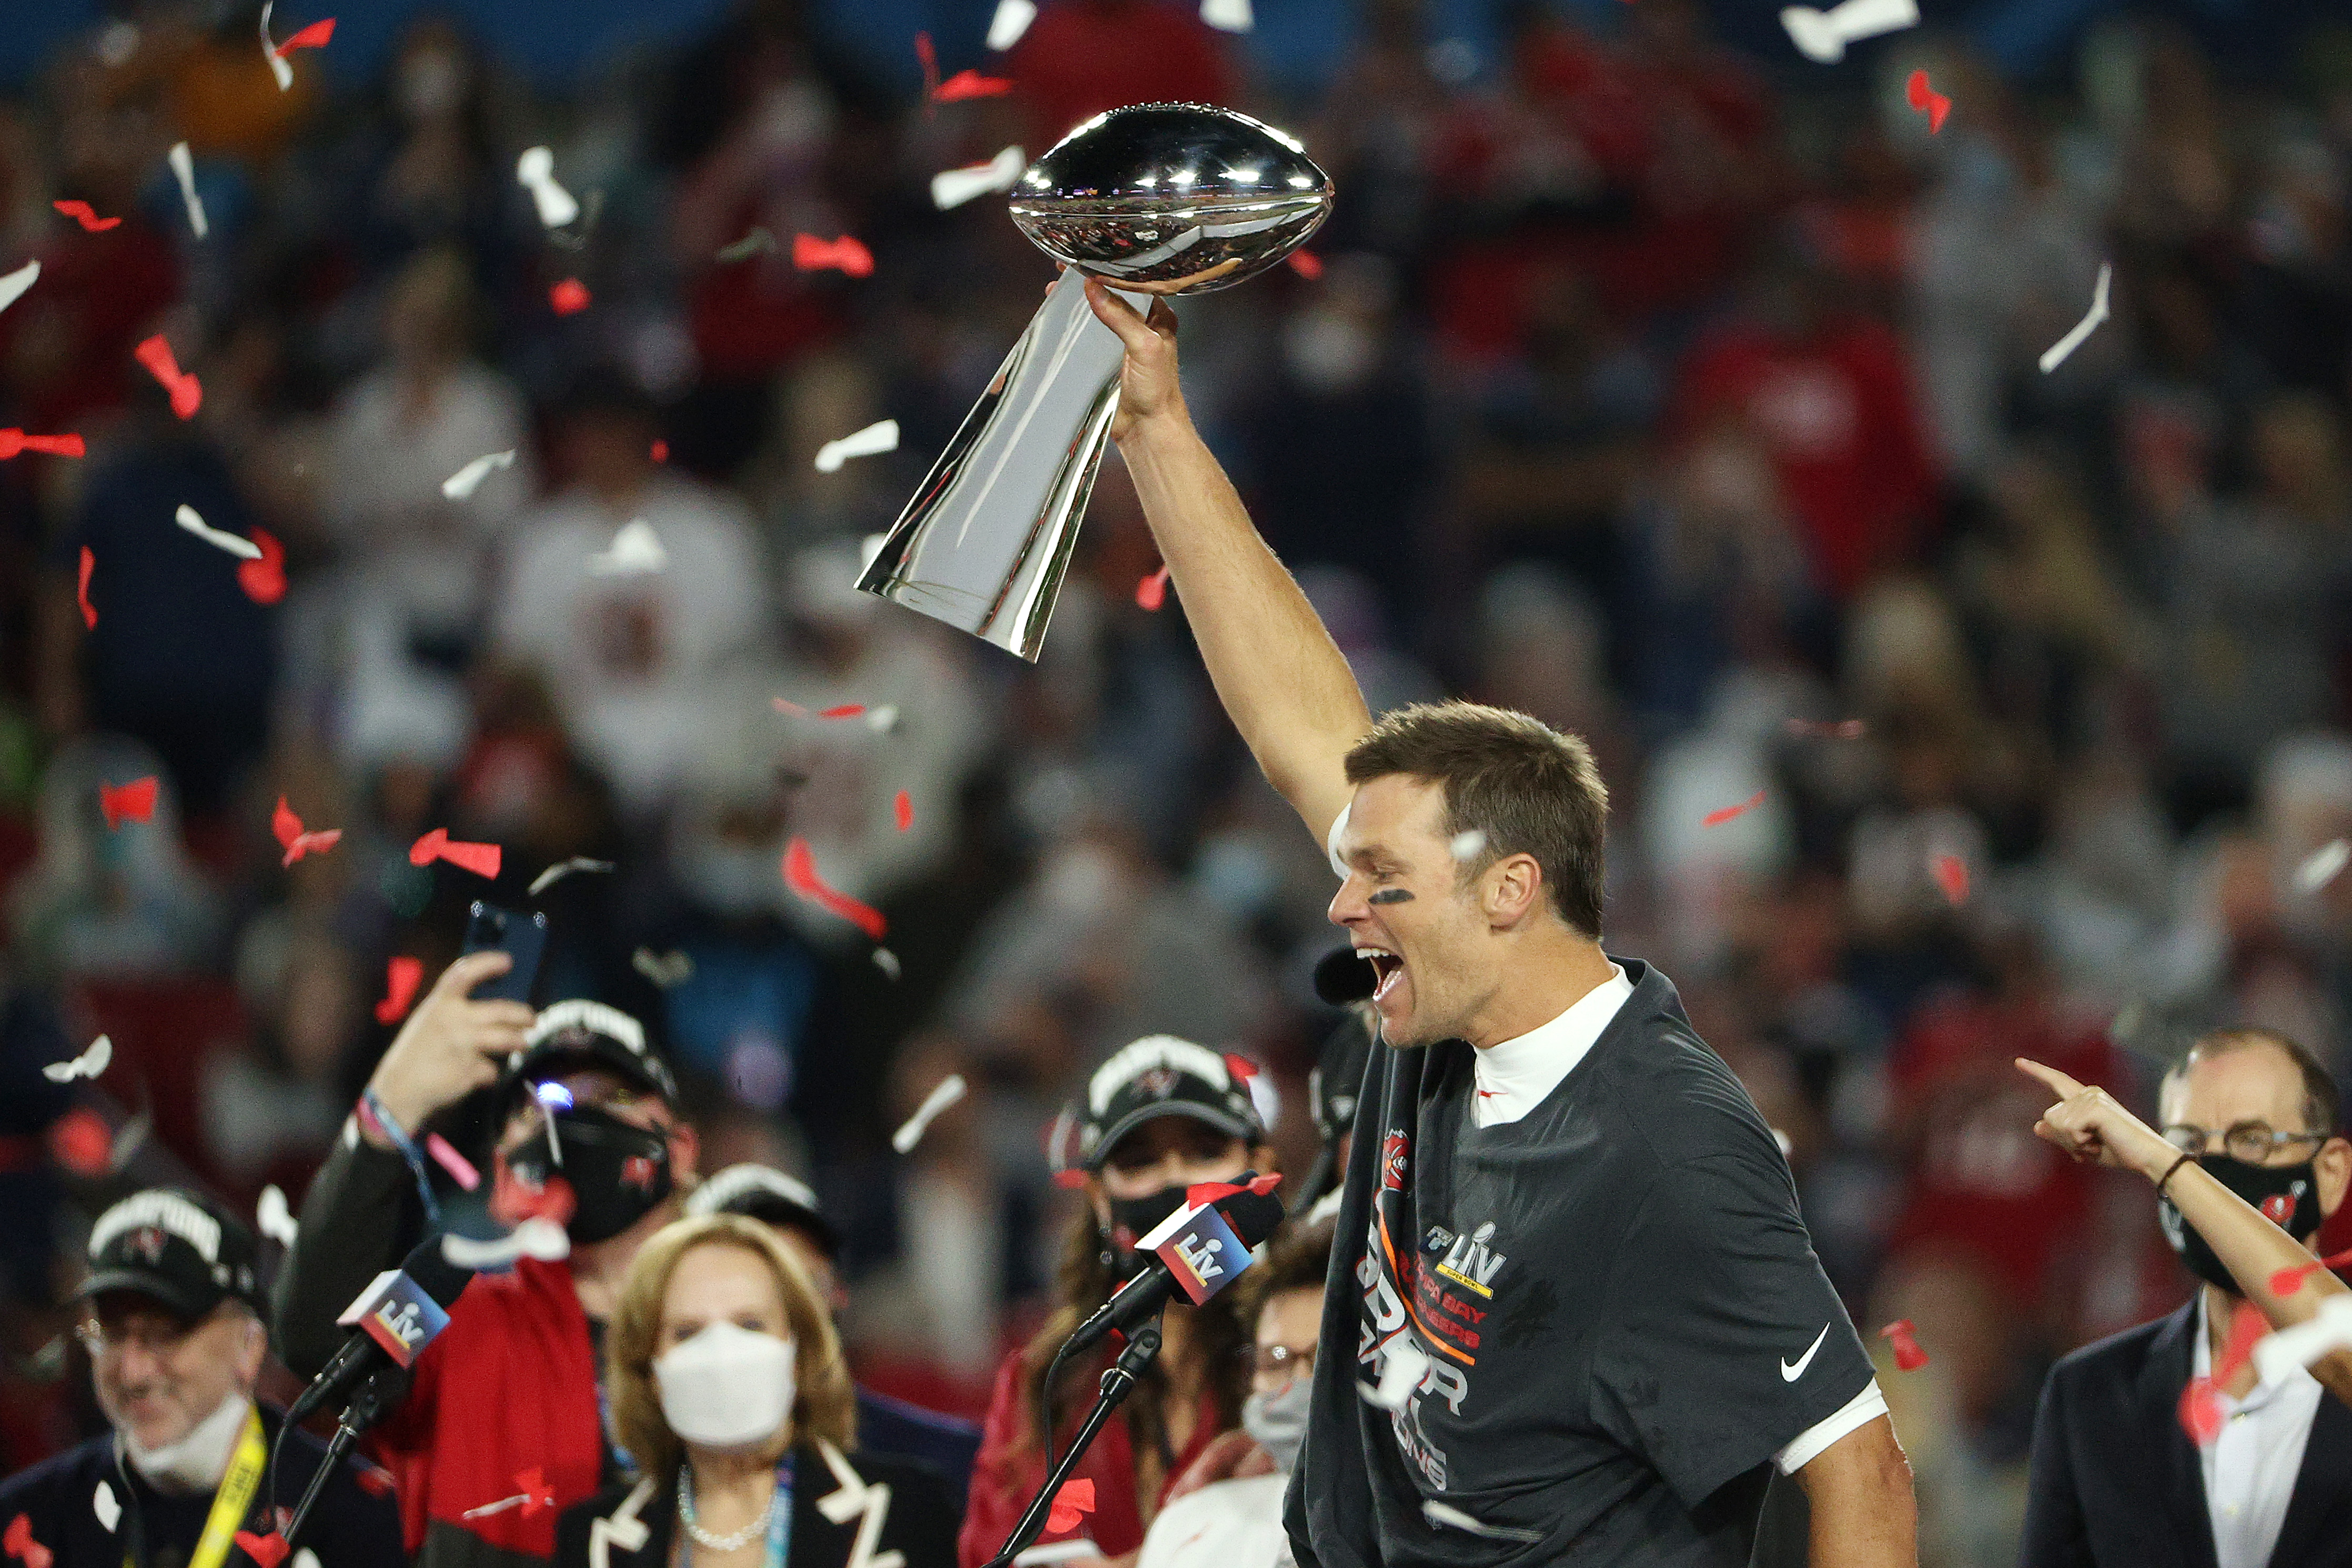 History of Super Bowls in South Florida